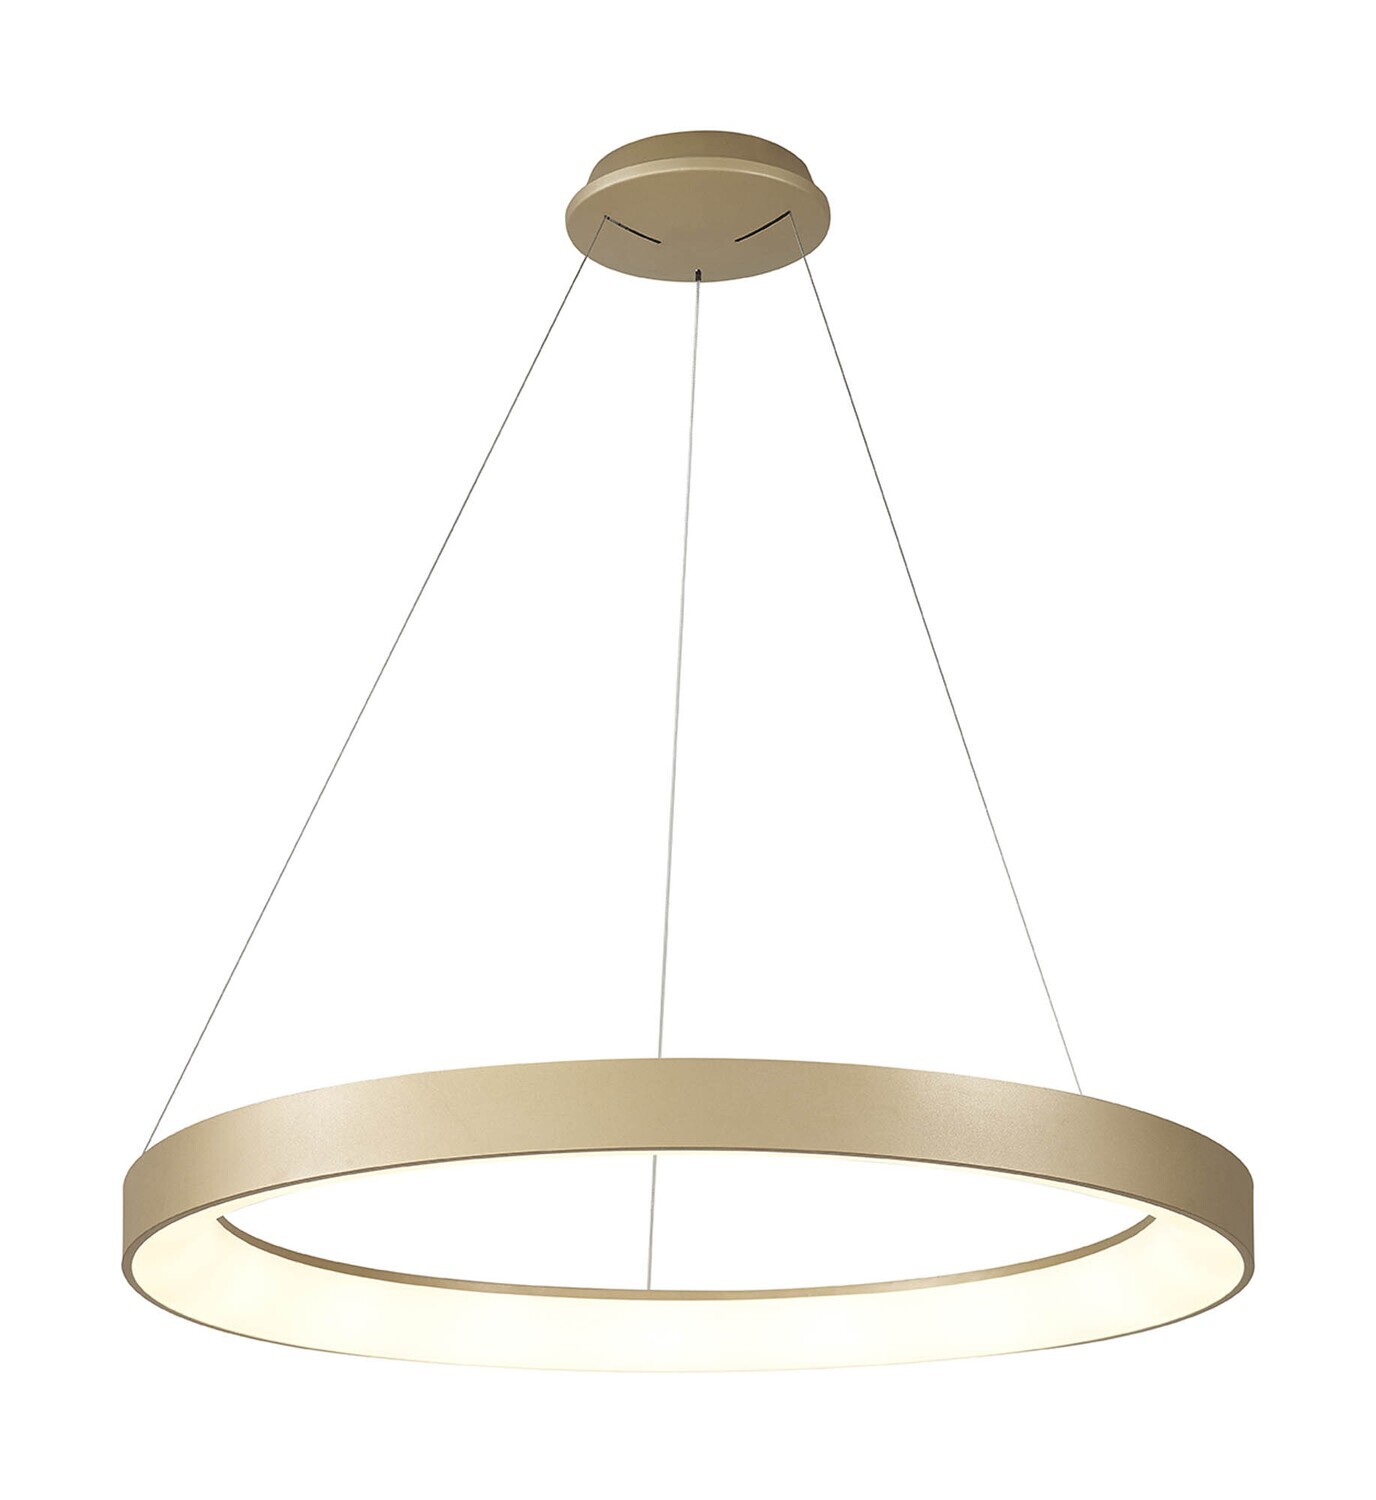 Niseko Ring Pendant 90cm 60W LED, 3000K-6000K Tuneable, 4200lm, Remote Control, Gold